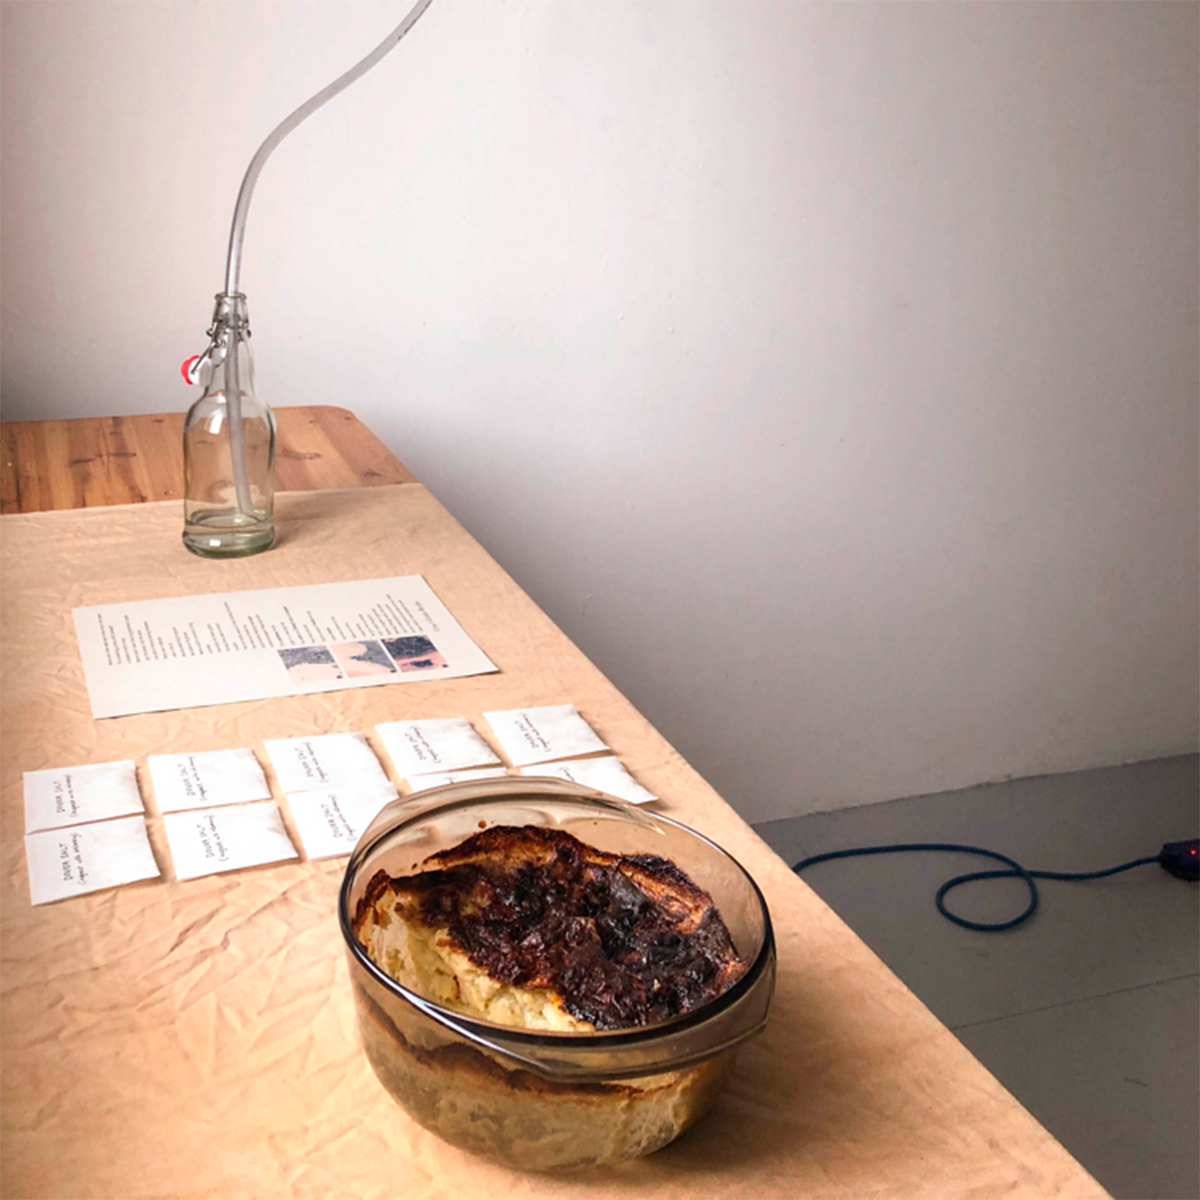 A photo of some food in a dish, on a wooden table with some paper.